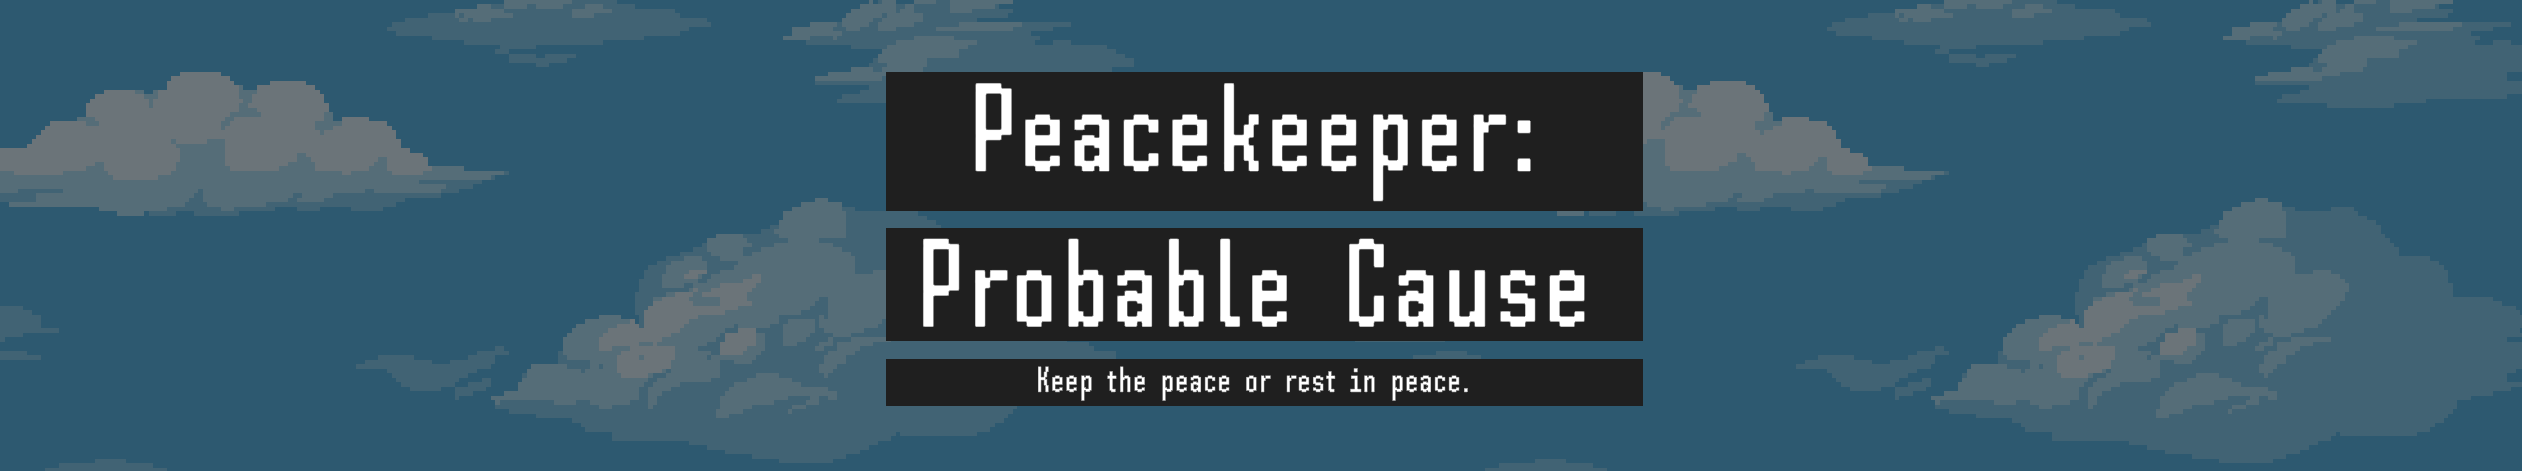 Peacekeeper: Probable Cause